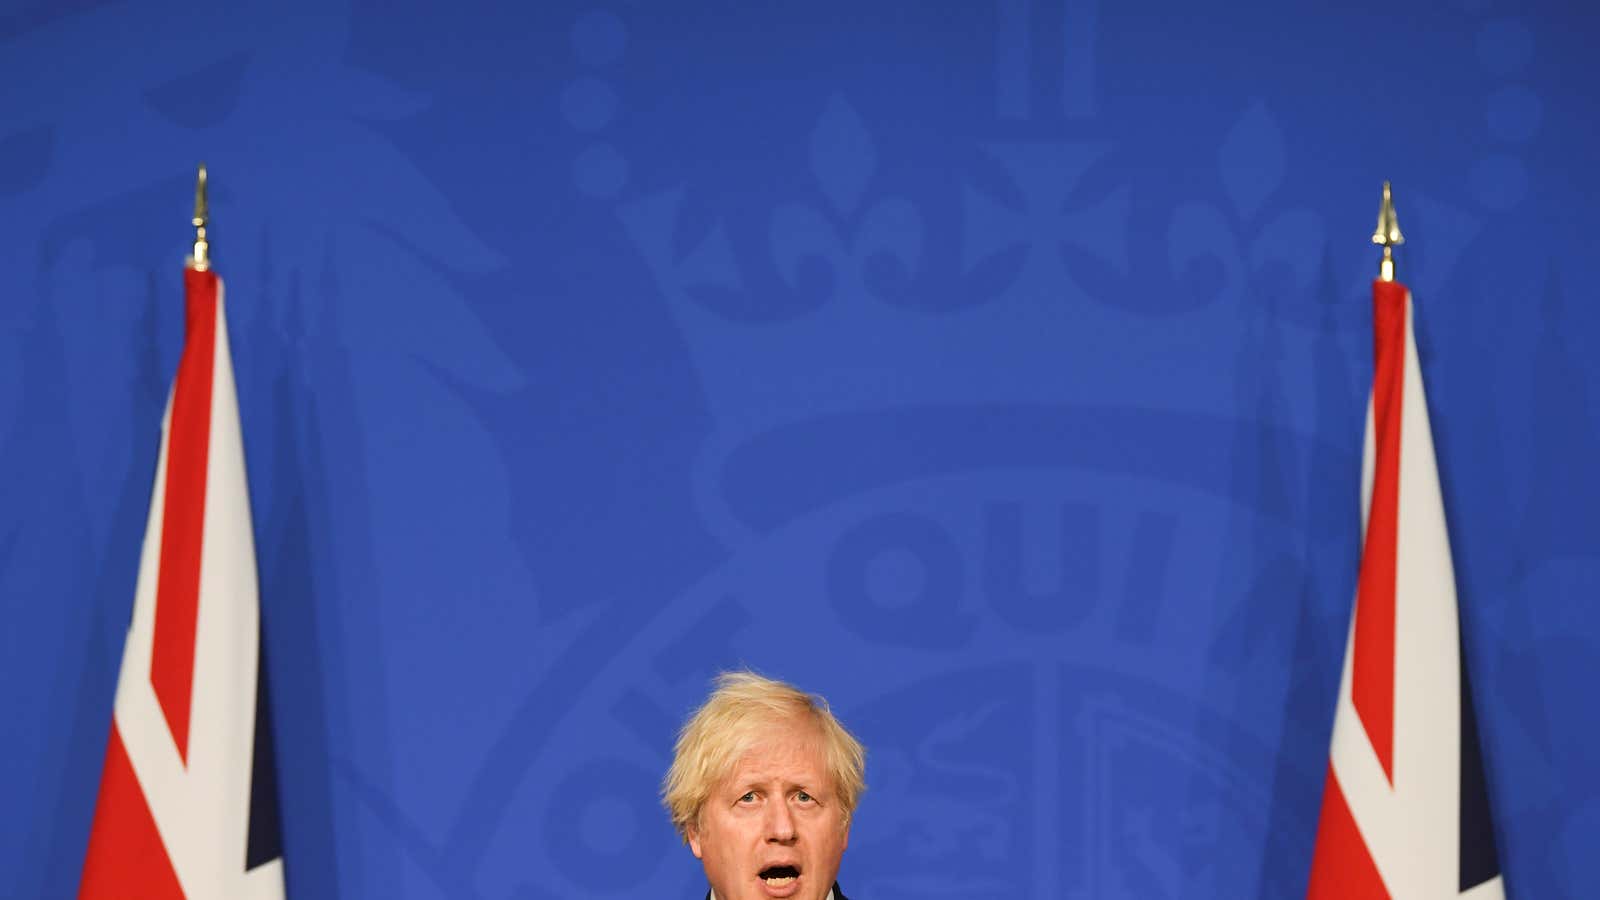 UK prime minister Boris Johnson at a July 5 press conference where he announced the lifting of Covid-19 restrictions in England.